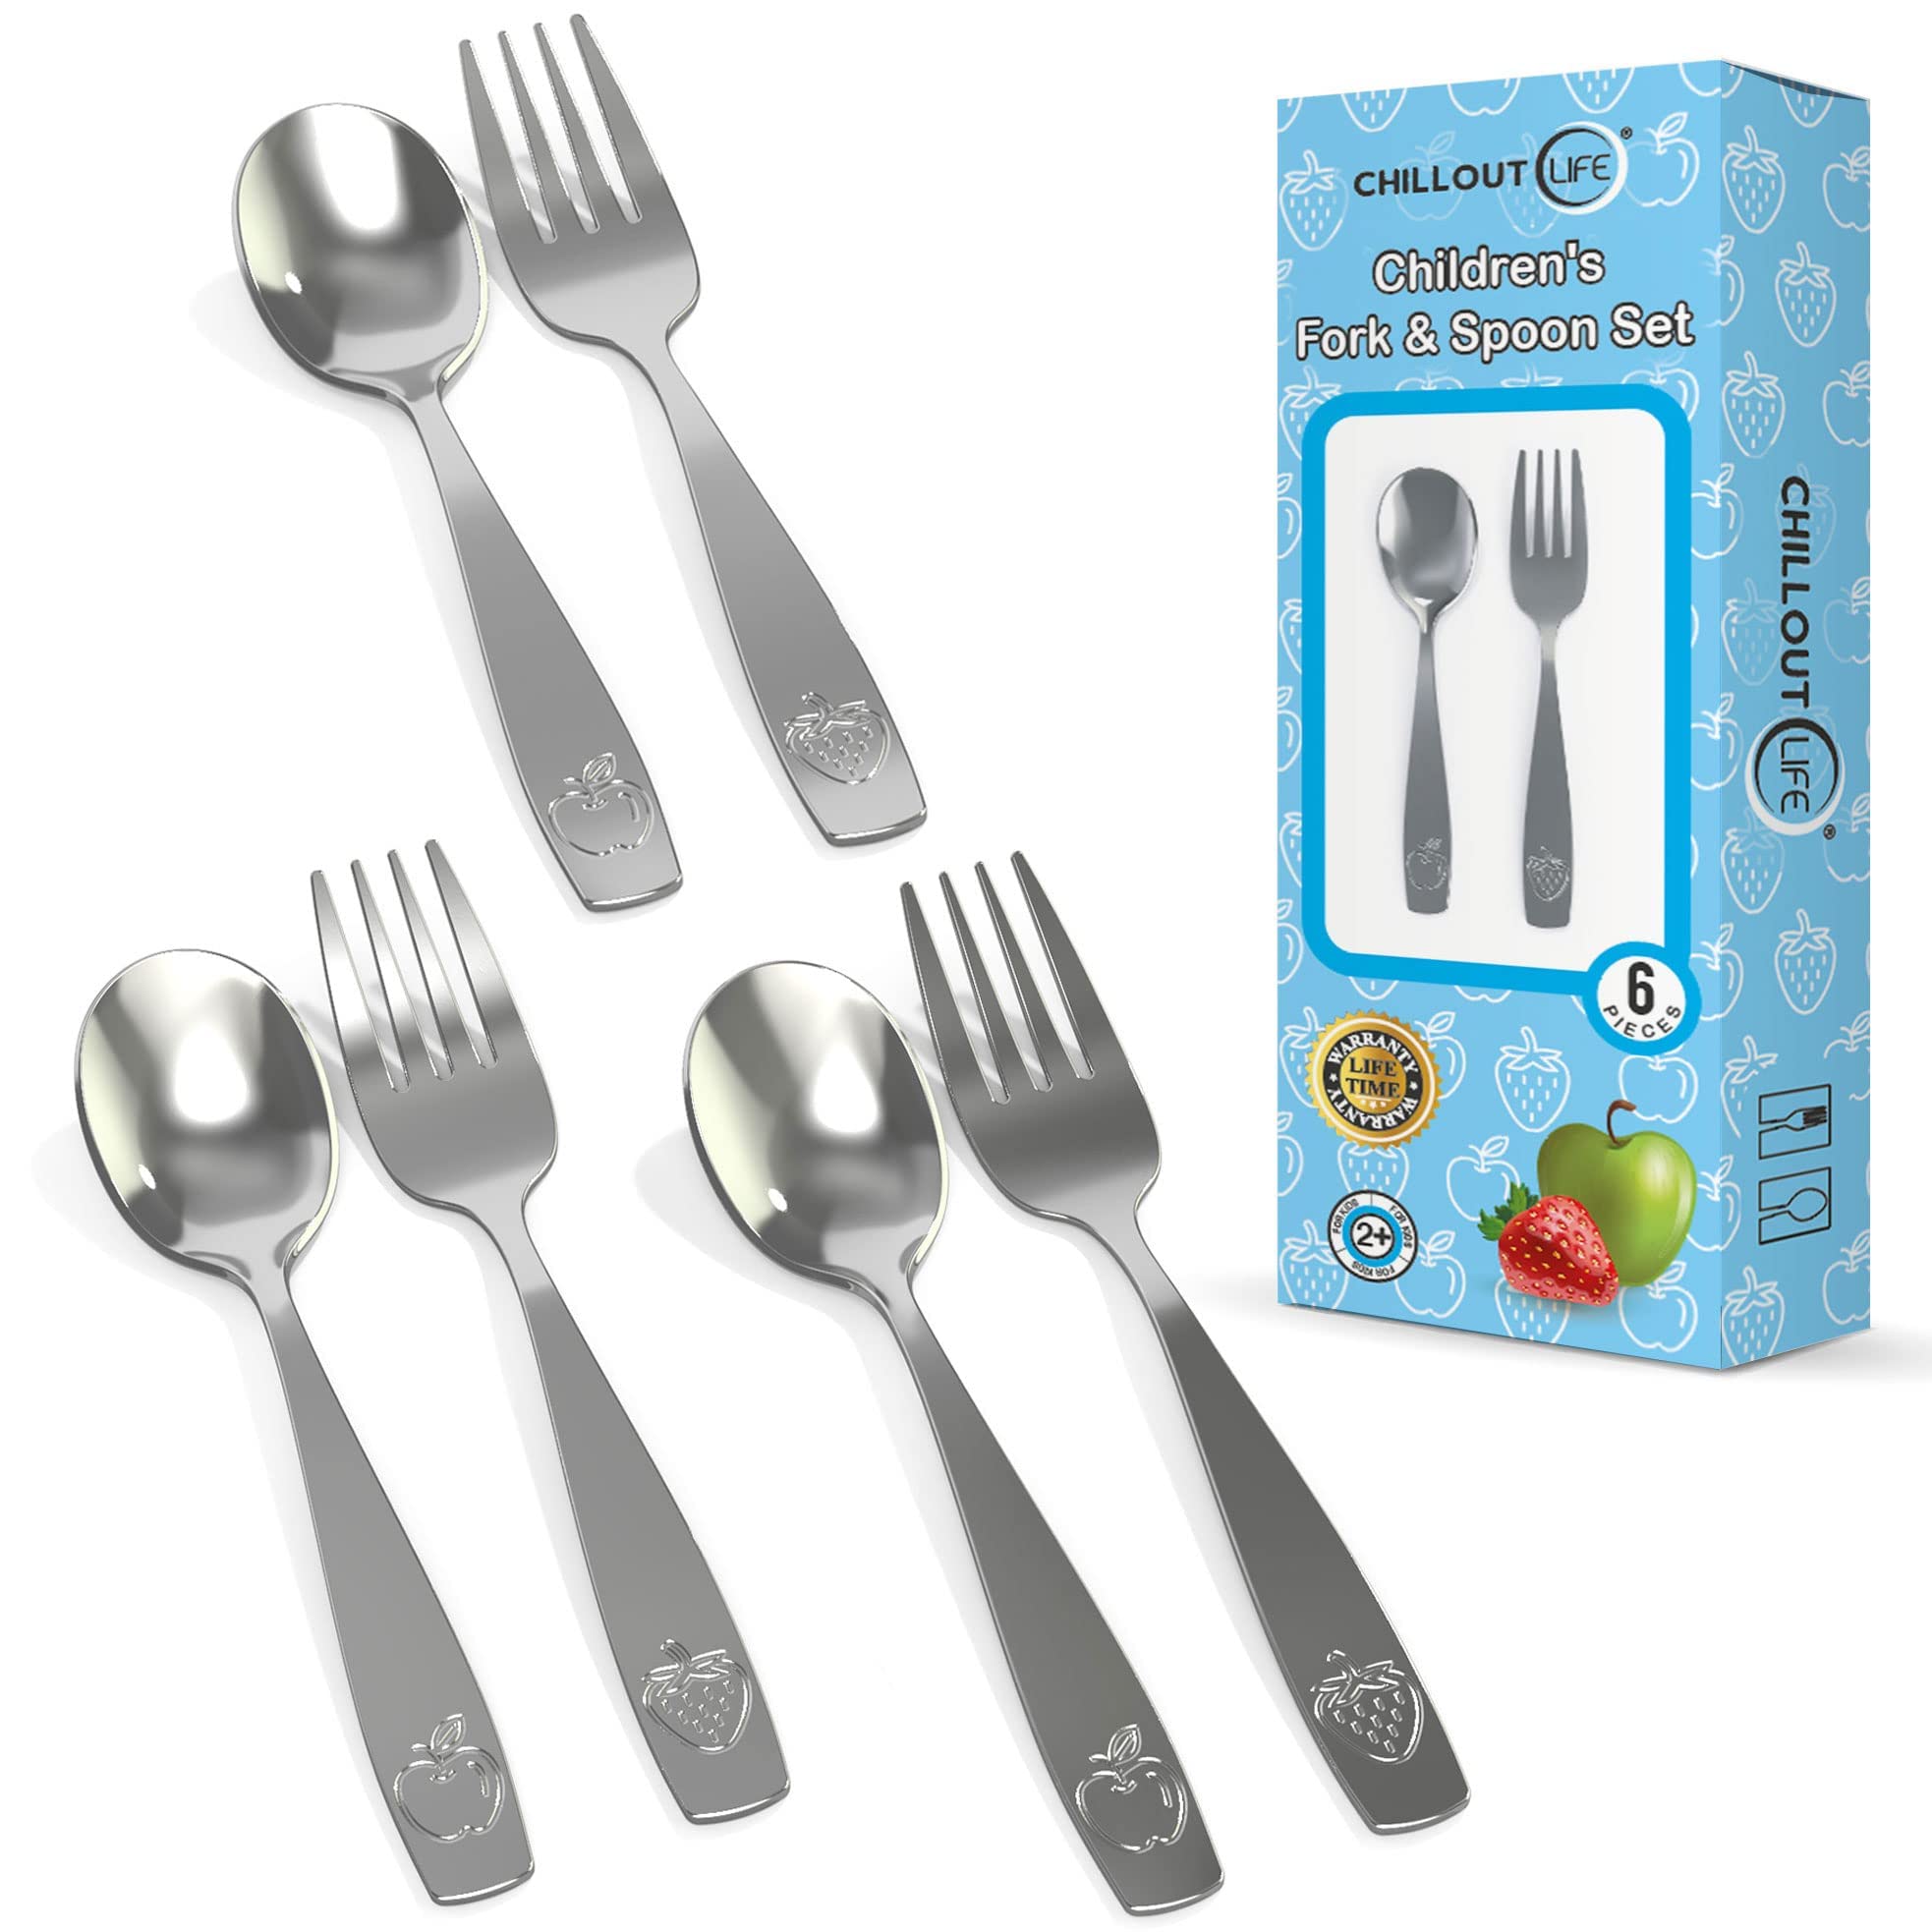 ChillOut Life 6 Piece Stainless Steel Kids Silverware Set - Child and Toddler Safe Flatware - Kids Utensil Set - Metal Kids Cutlery Set (Inclu